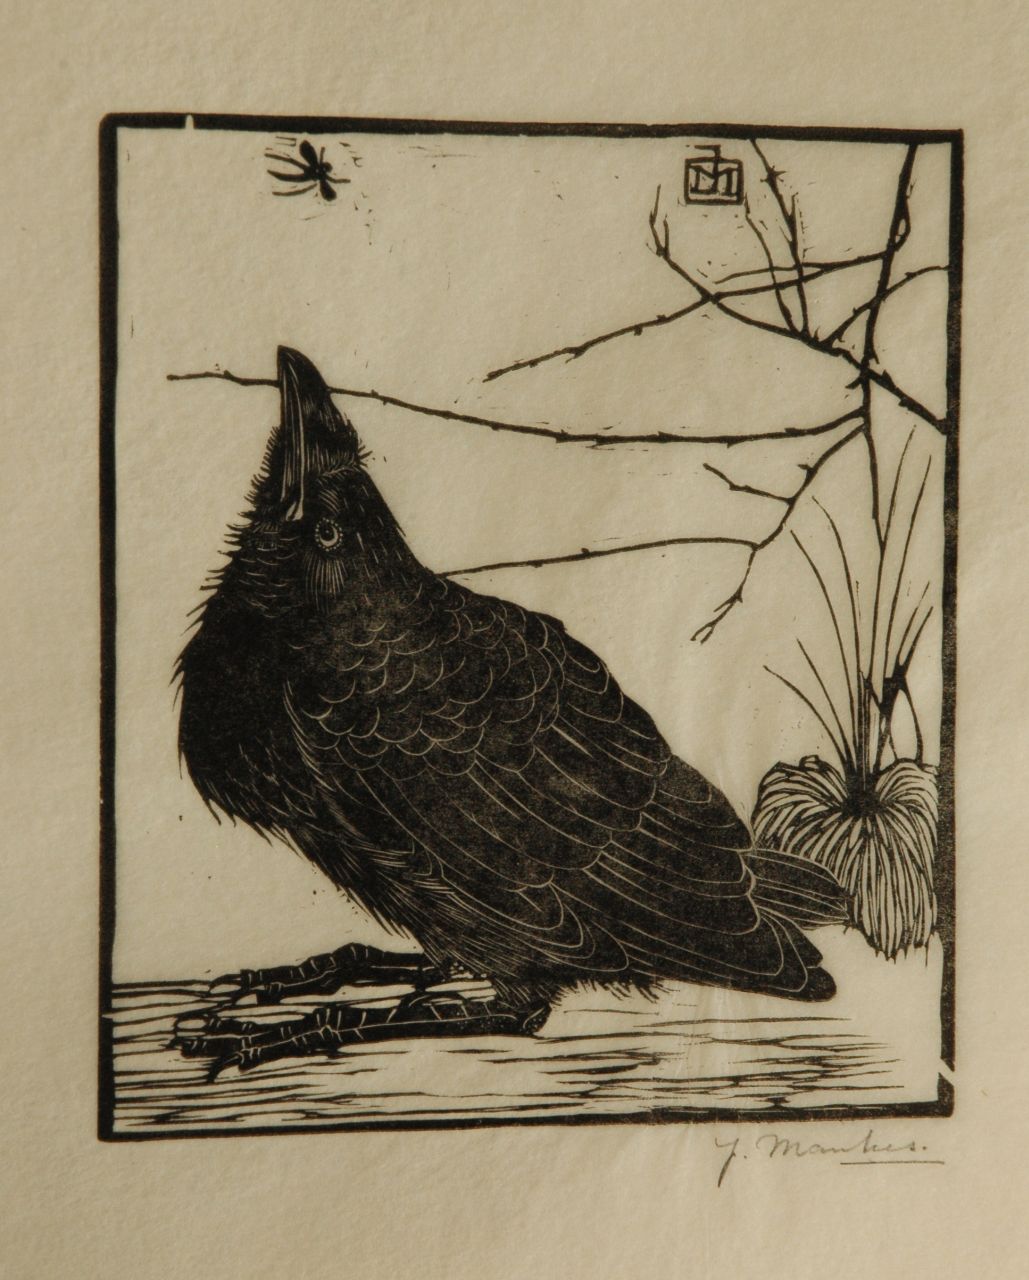 Mankes J.  | Jan Mankes, A crow watching a mosquito, woodcut on Japanese paper 11.8 x 10.2 cm, signed w mon in the block and l.r. in full (in pencil and executed in 1918